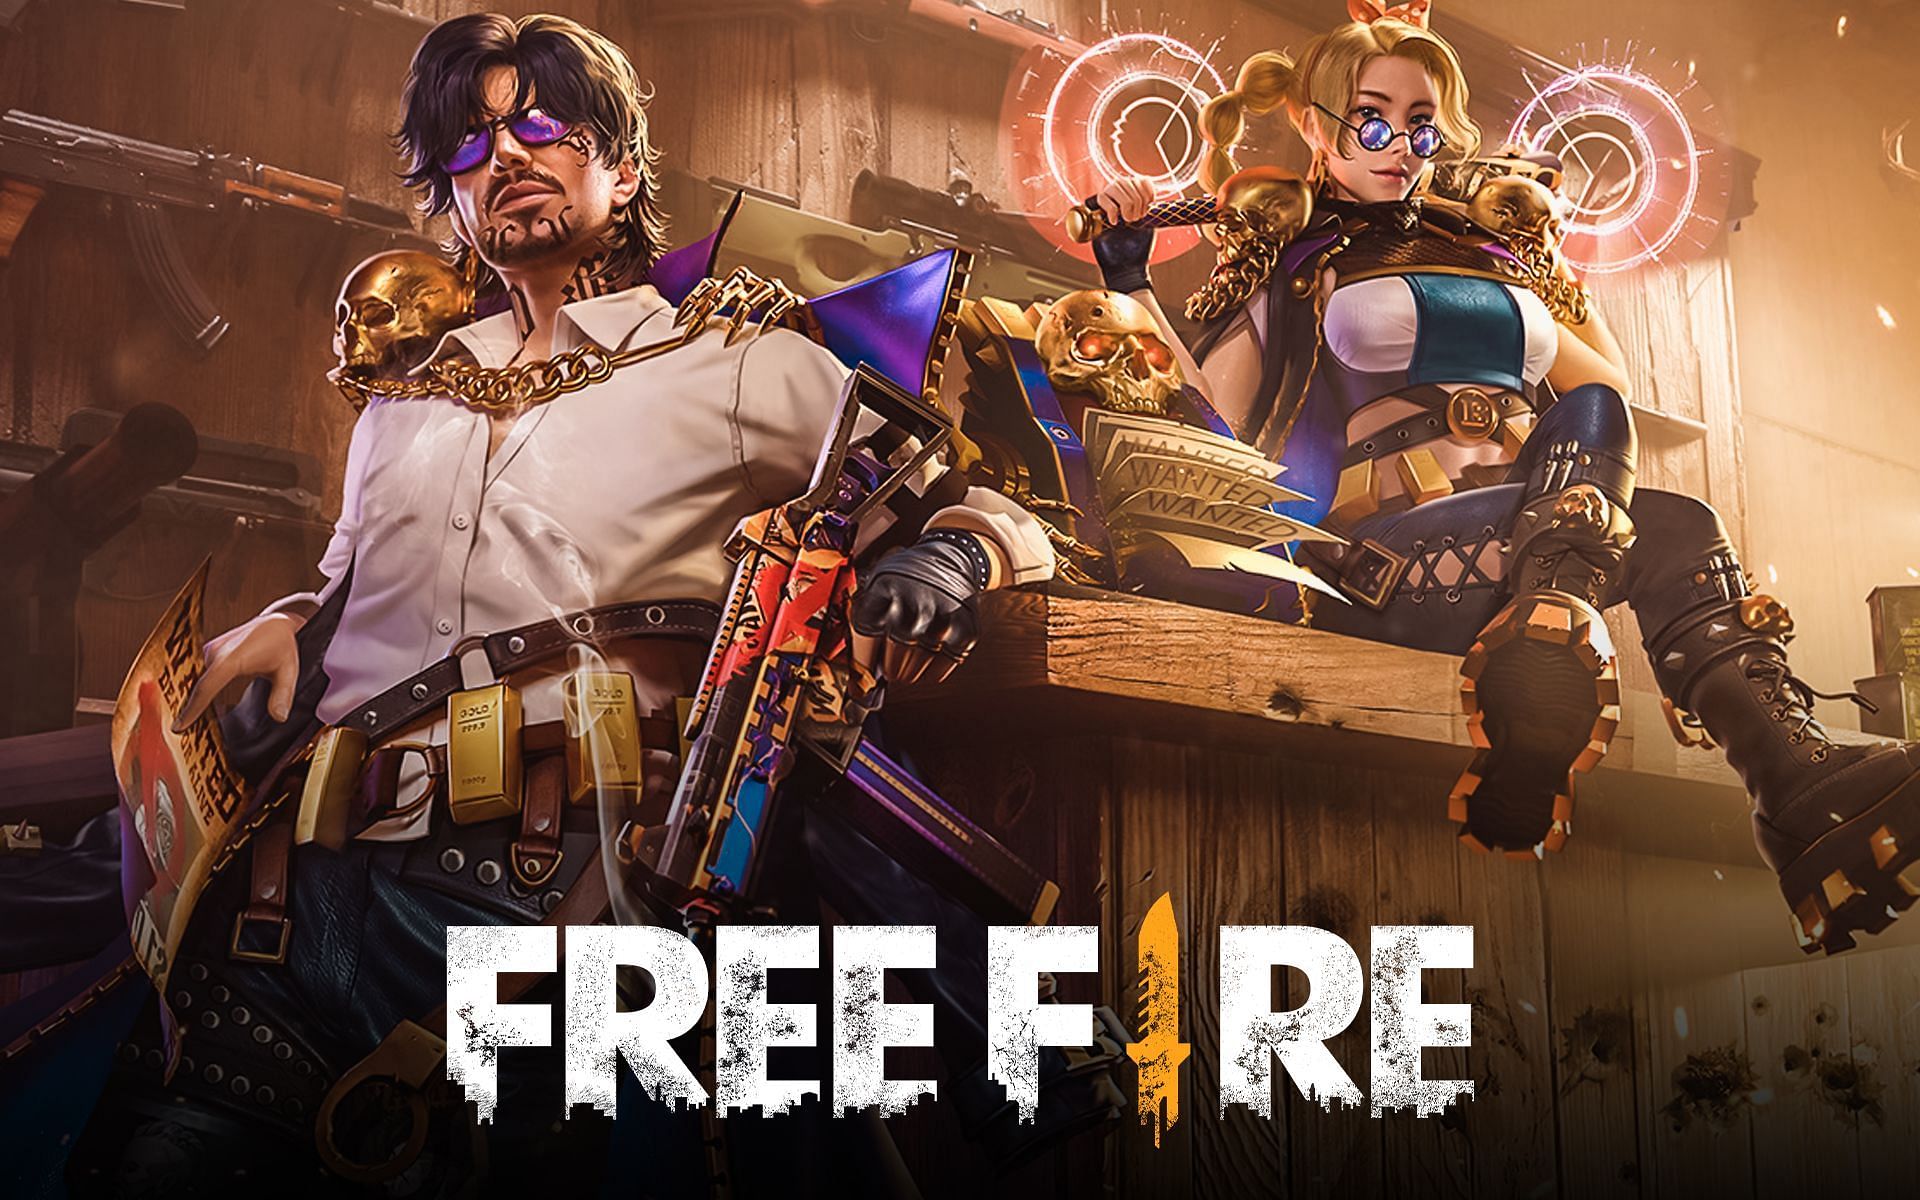 Players can play free Fire&rsquo;s demo to test out the game (Image via Free Fire)